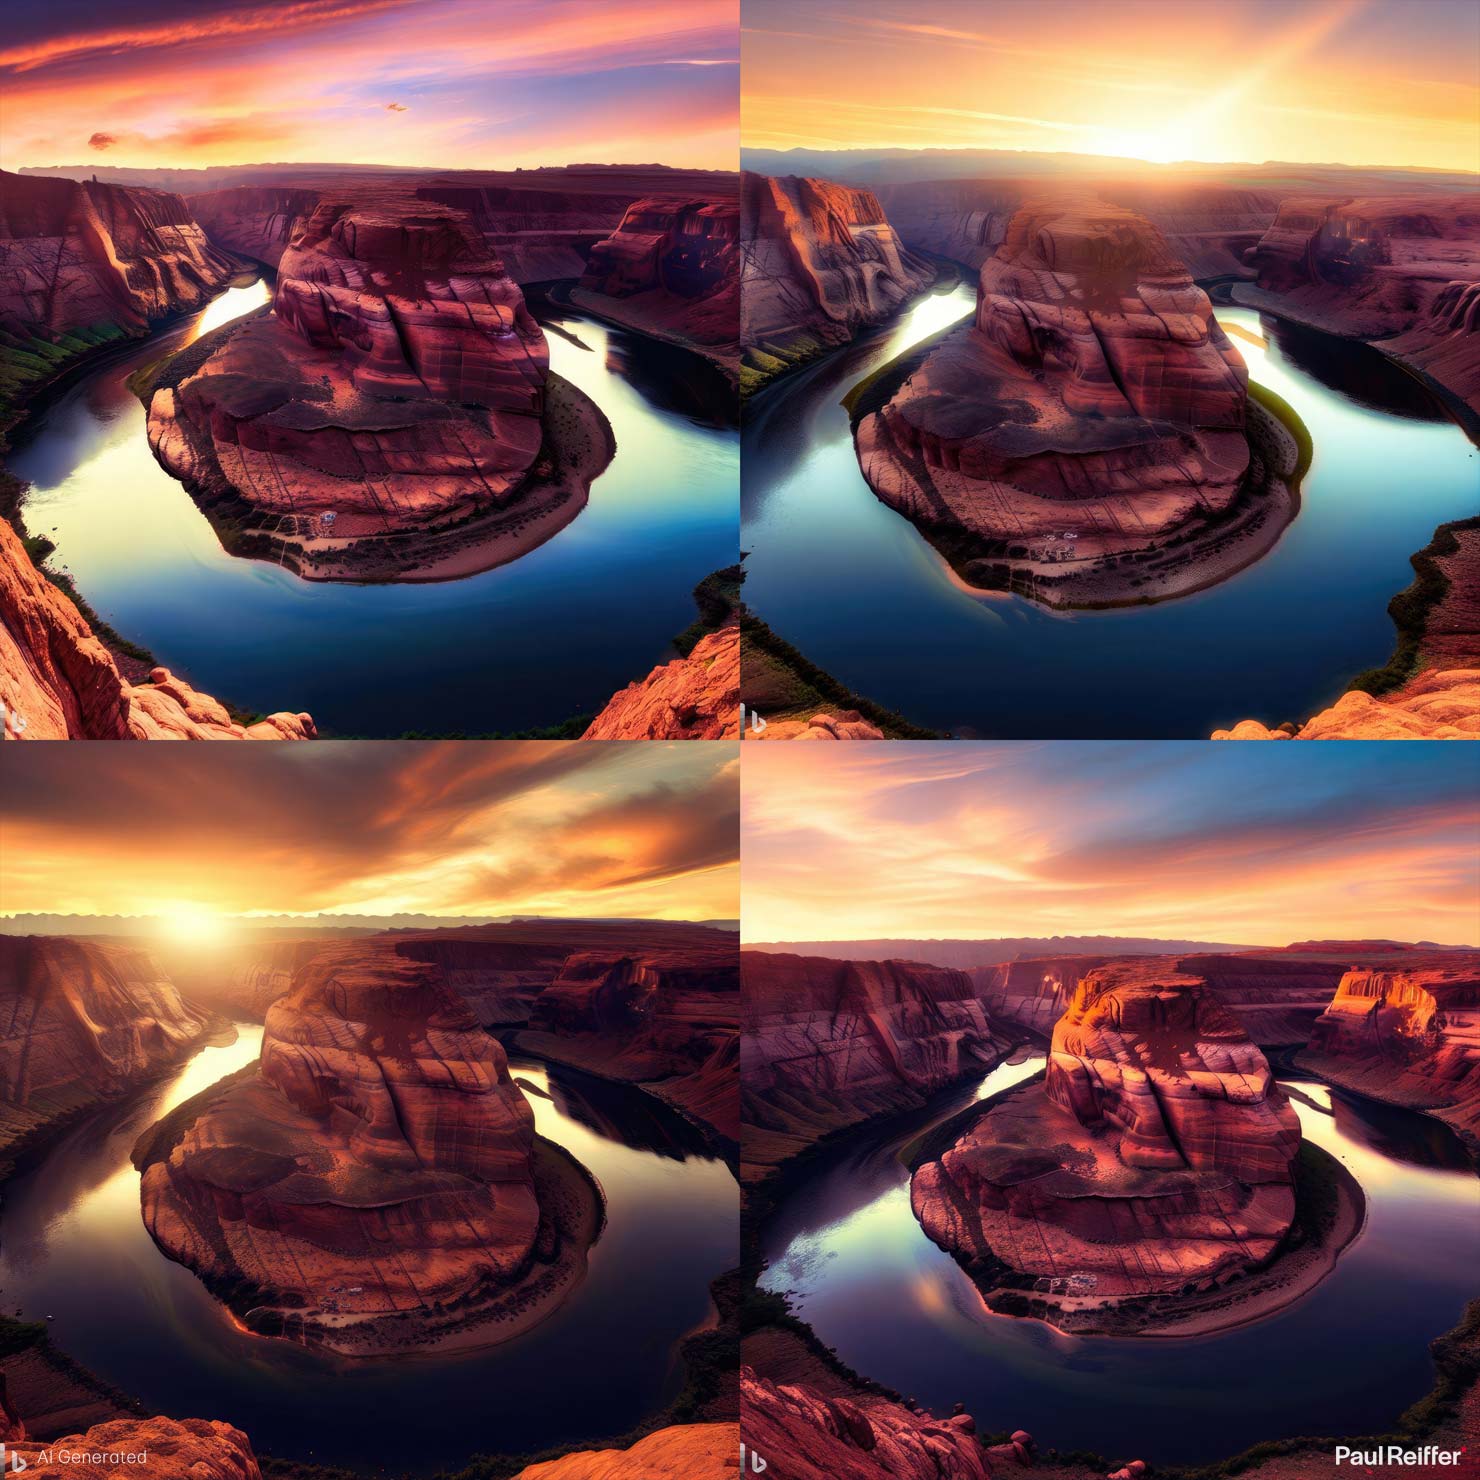 Horseshoe Bend Classic Shot Dall E Image Creator Photographers Landscape How To Use AI Images Good Bad Review Bard Bing ChatGPT Guide Paul Reiffer